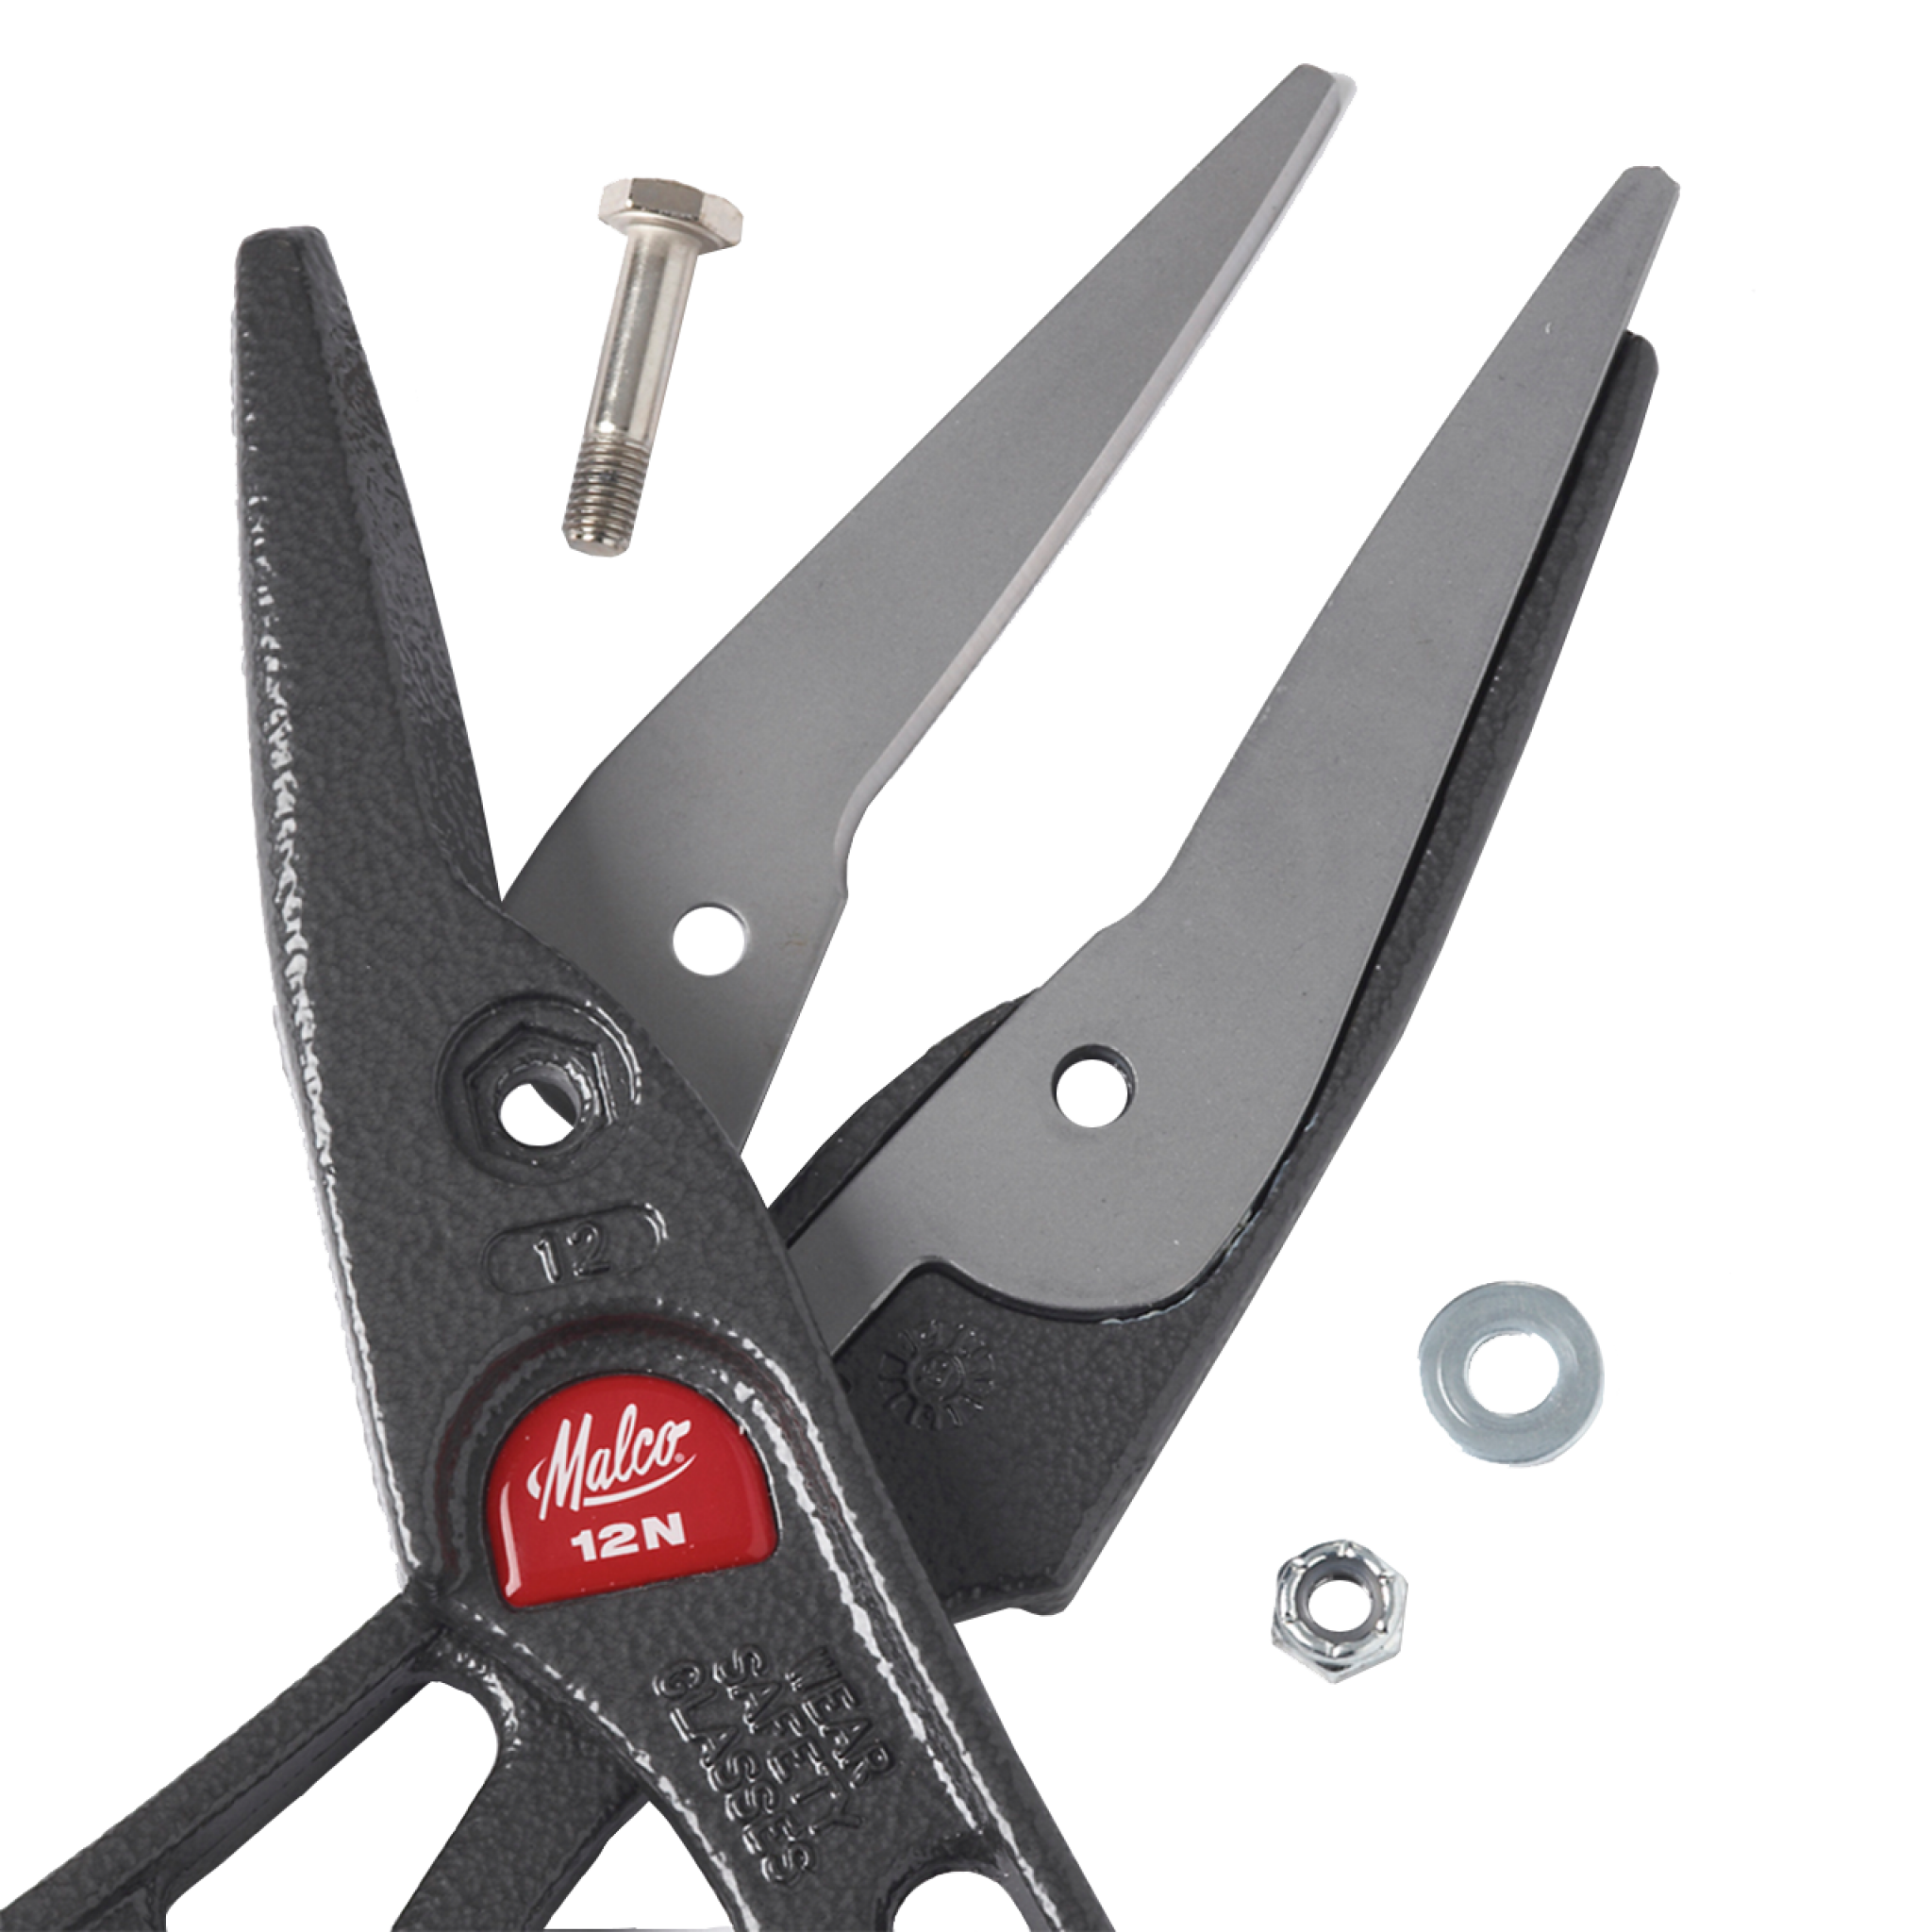 Andy Combination Snip Replacement Blades (MC12NRB)